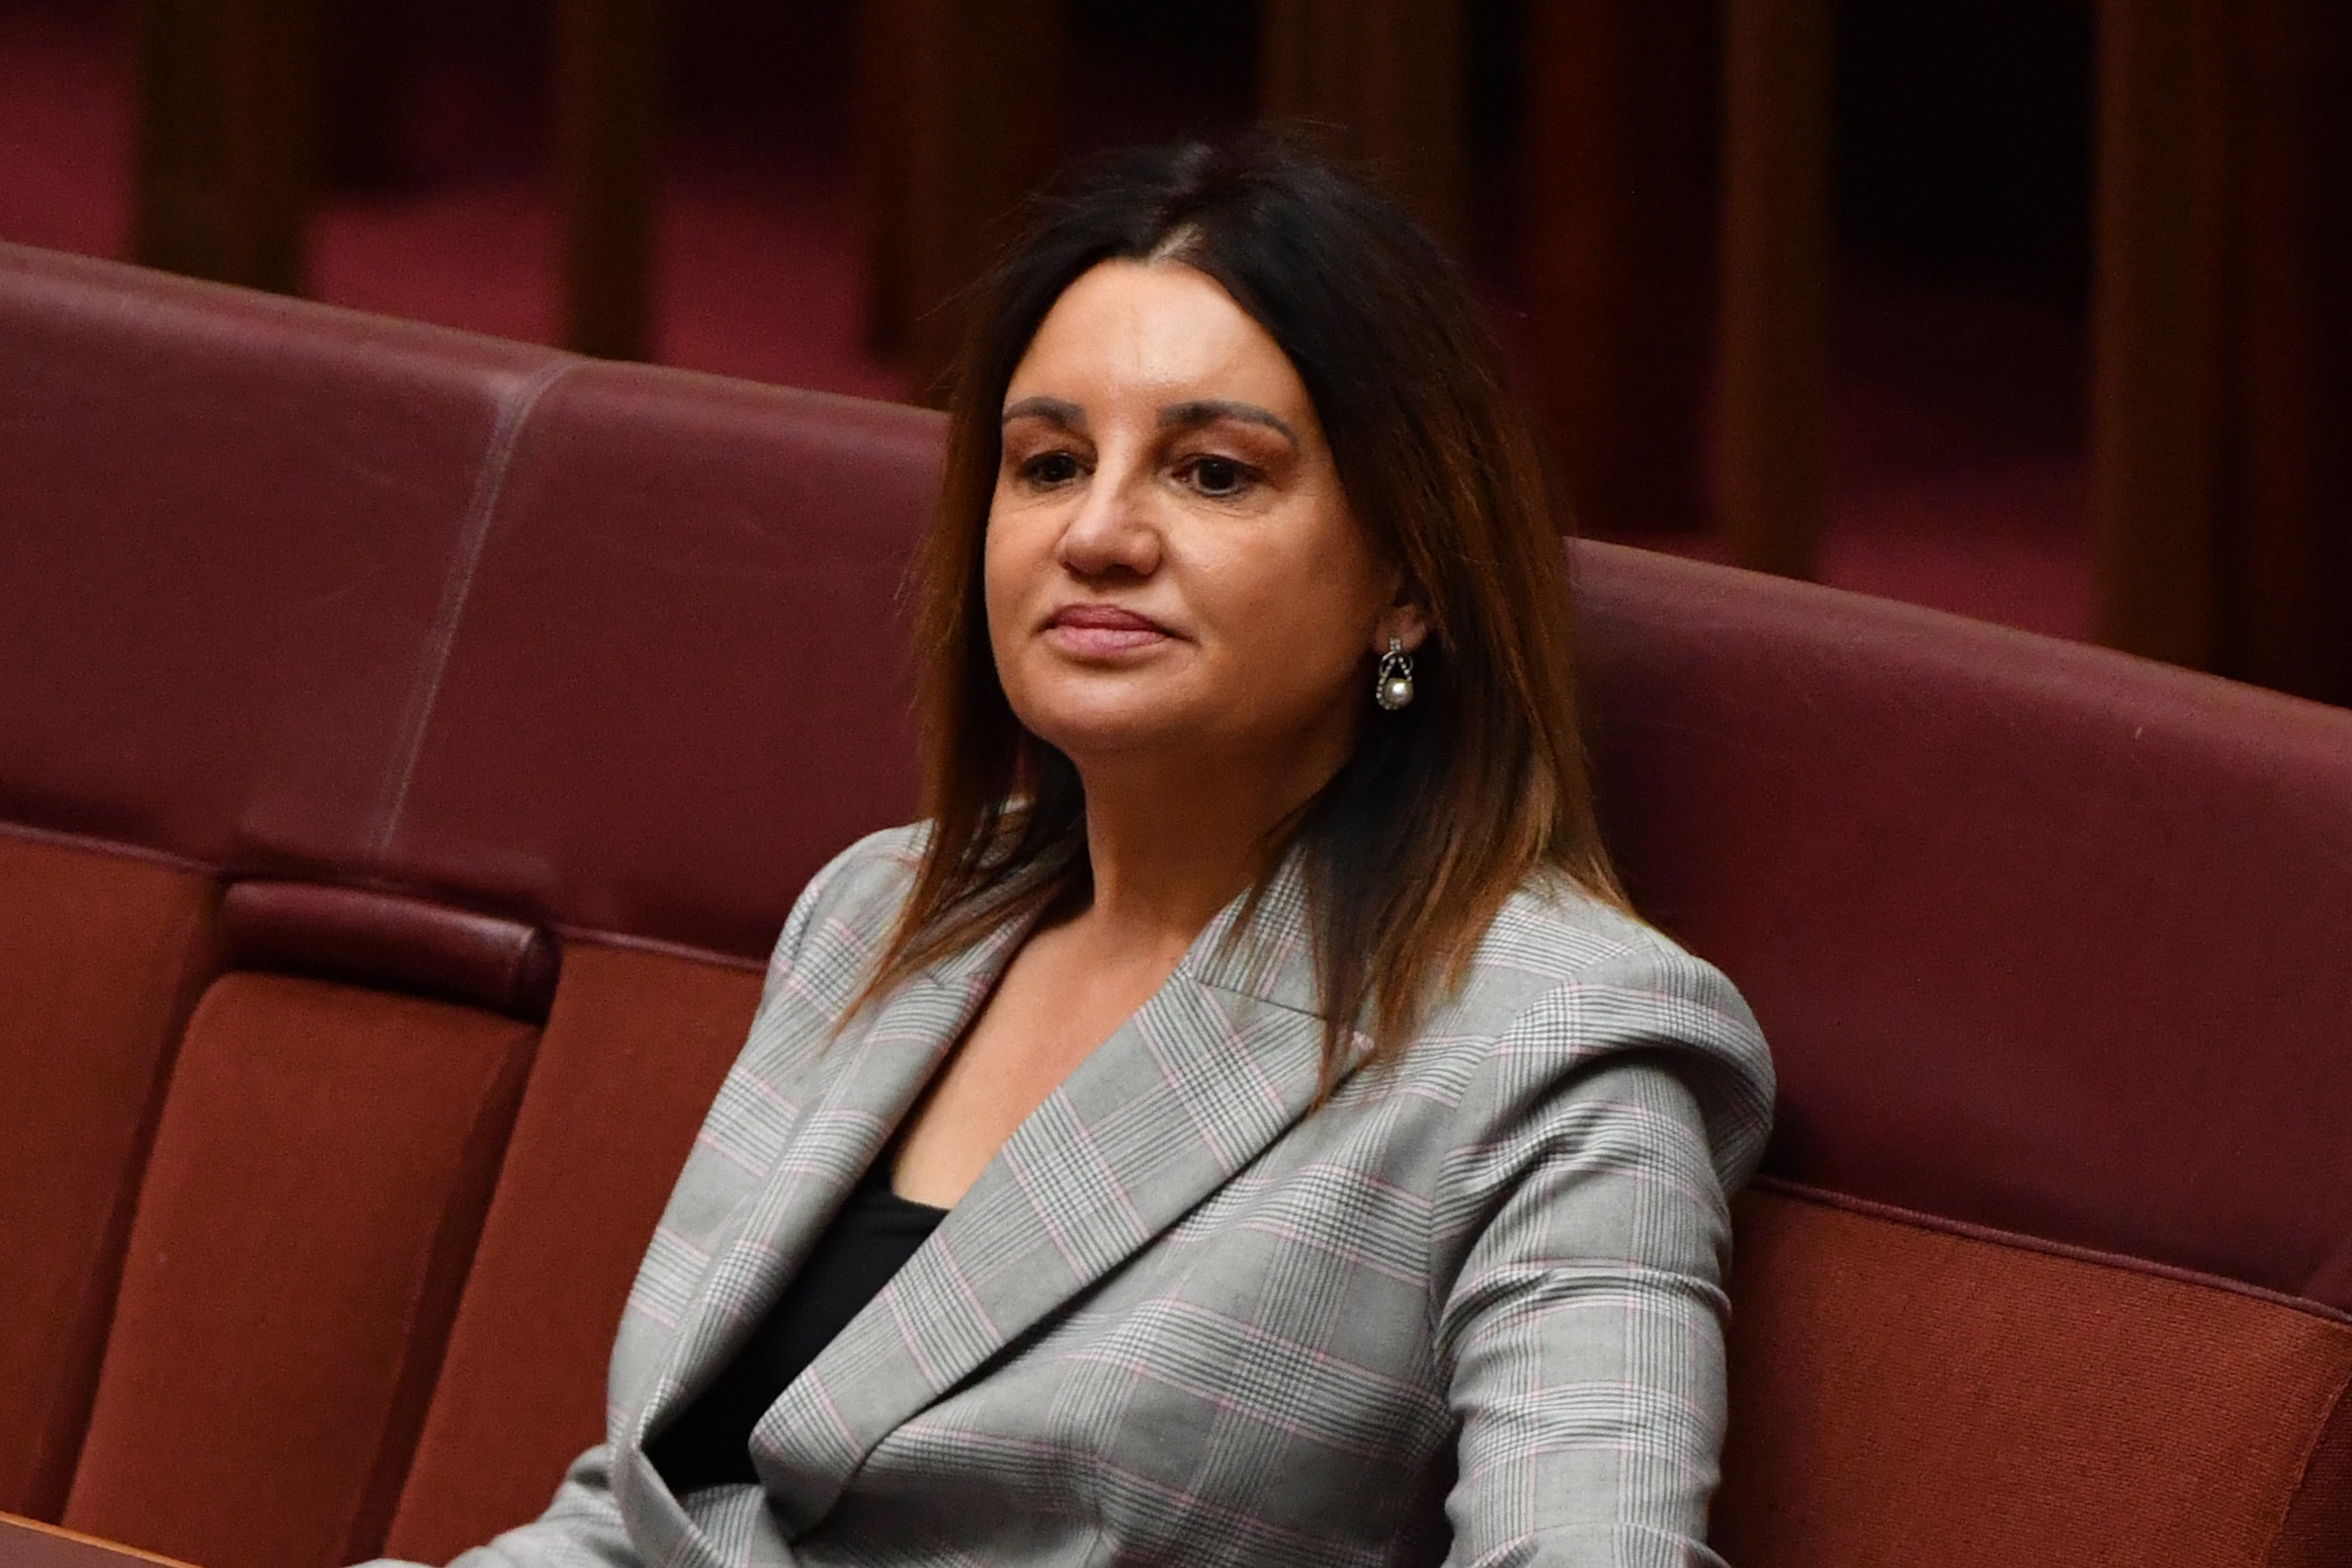 Jacqui Lambie Network Senator Jacqui Lambie in Senate chamber at Parliament House in Canberra, Monday, December 2, 2019. (AAP Image/Mick Tsikas) NO ARCHIVING